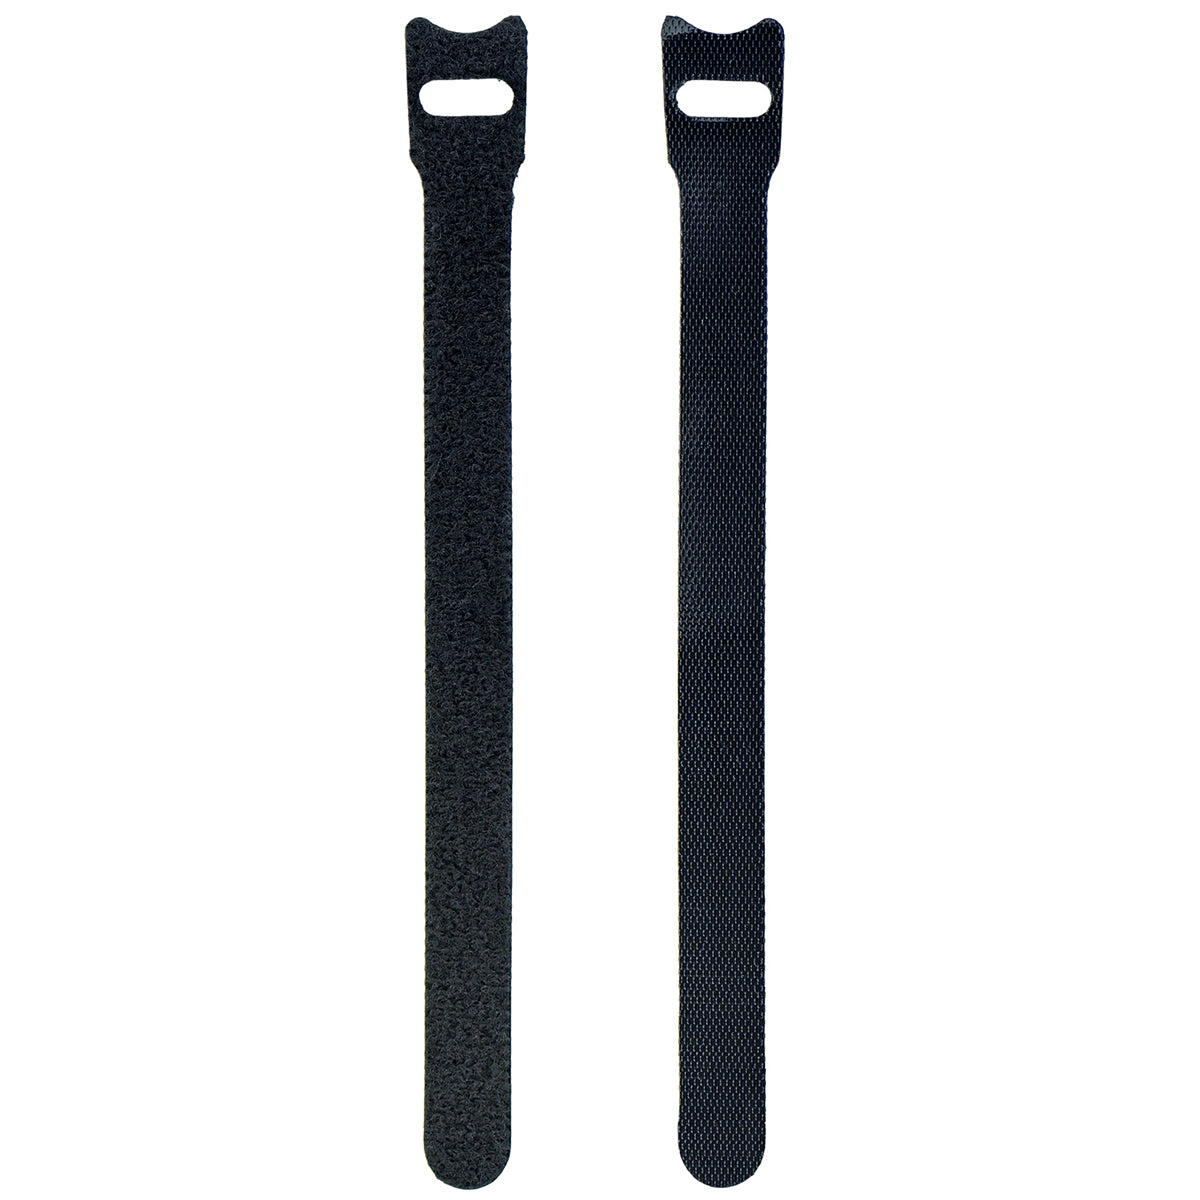 Displaying of two upright black nylon cable ties  